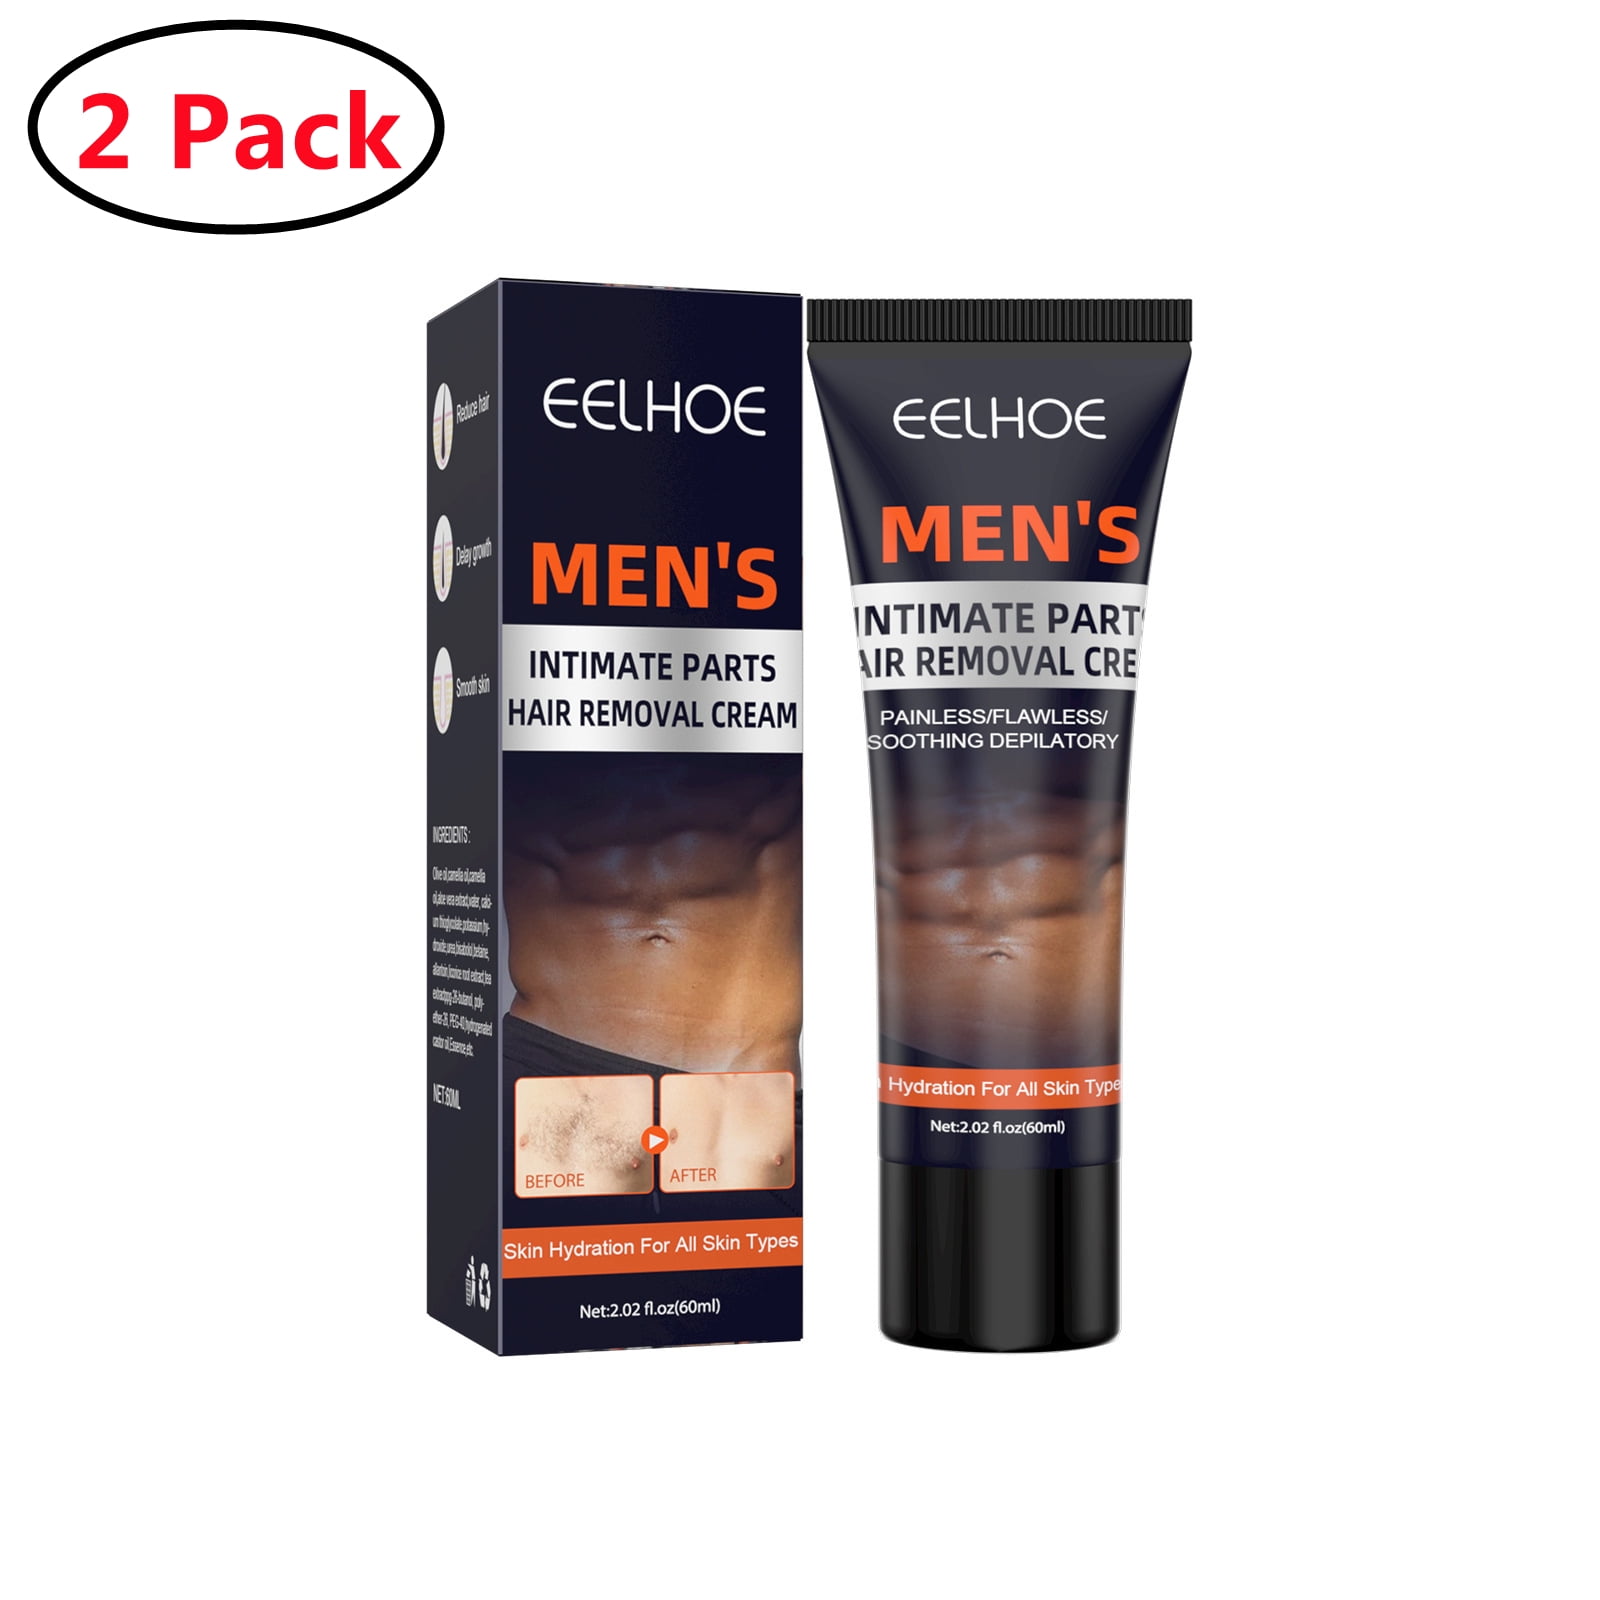 2 Pack Hair Crew Intimate/Private Hair Removal Cream - Painless, Flawless,  Soothing Depilatory for Unwanted Coarse Male Body Hair 